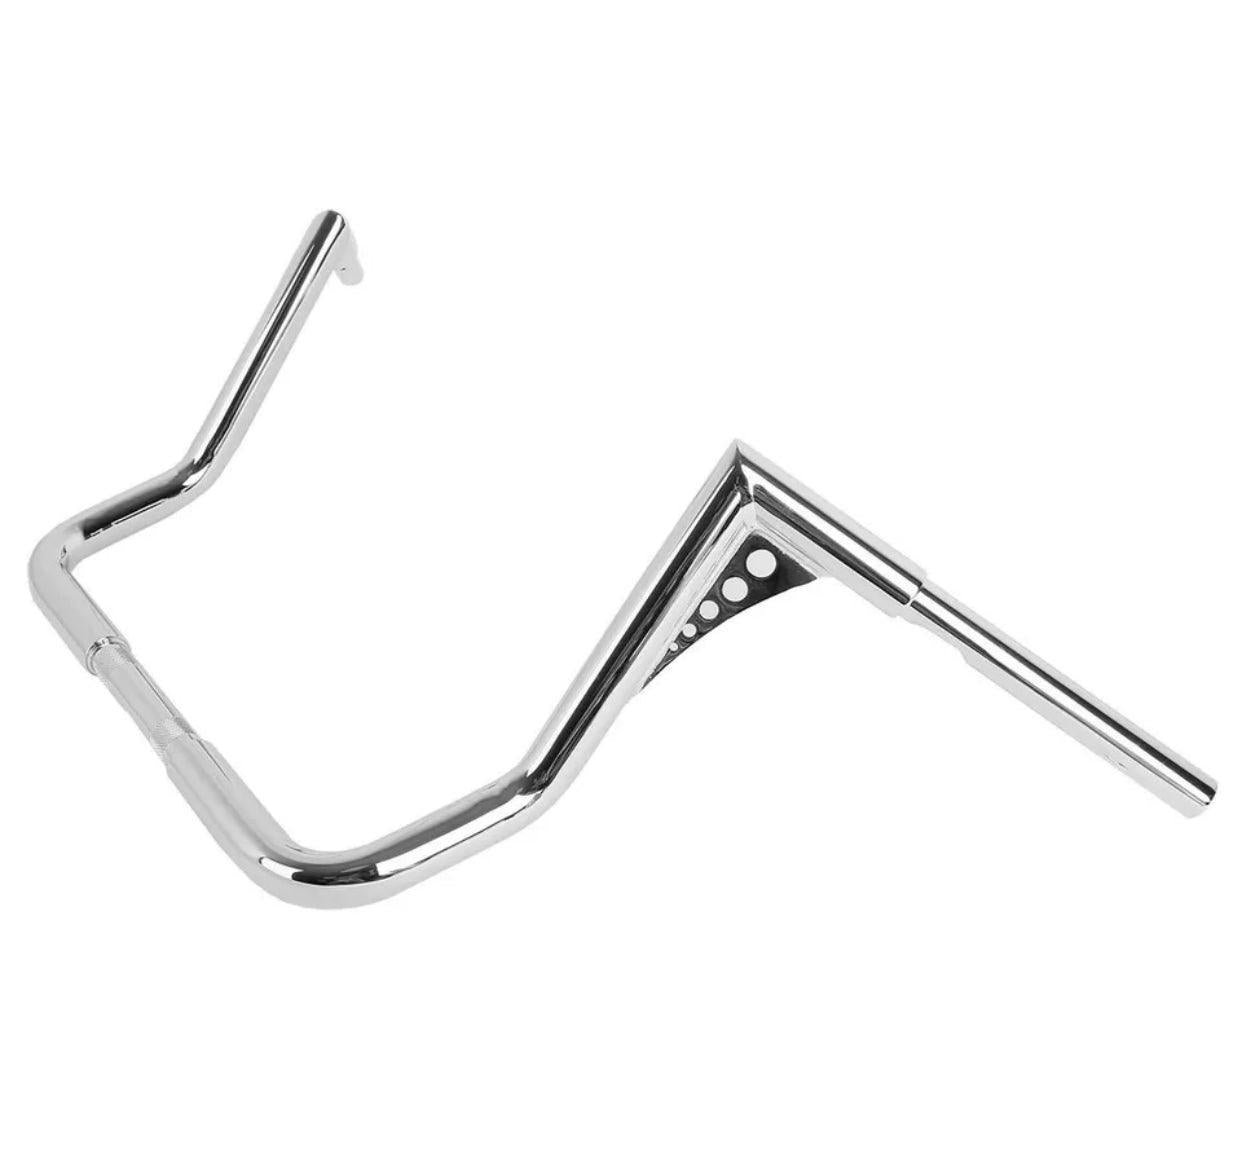 16" Rise Handlebar Fit for Harley Touring Electra Glide Dresser Bagger - Moto Life Products